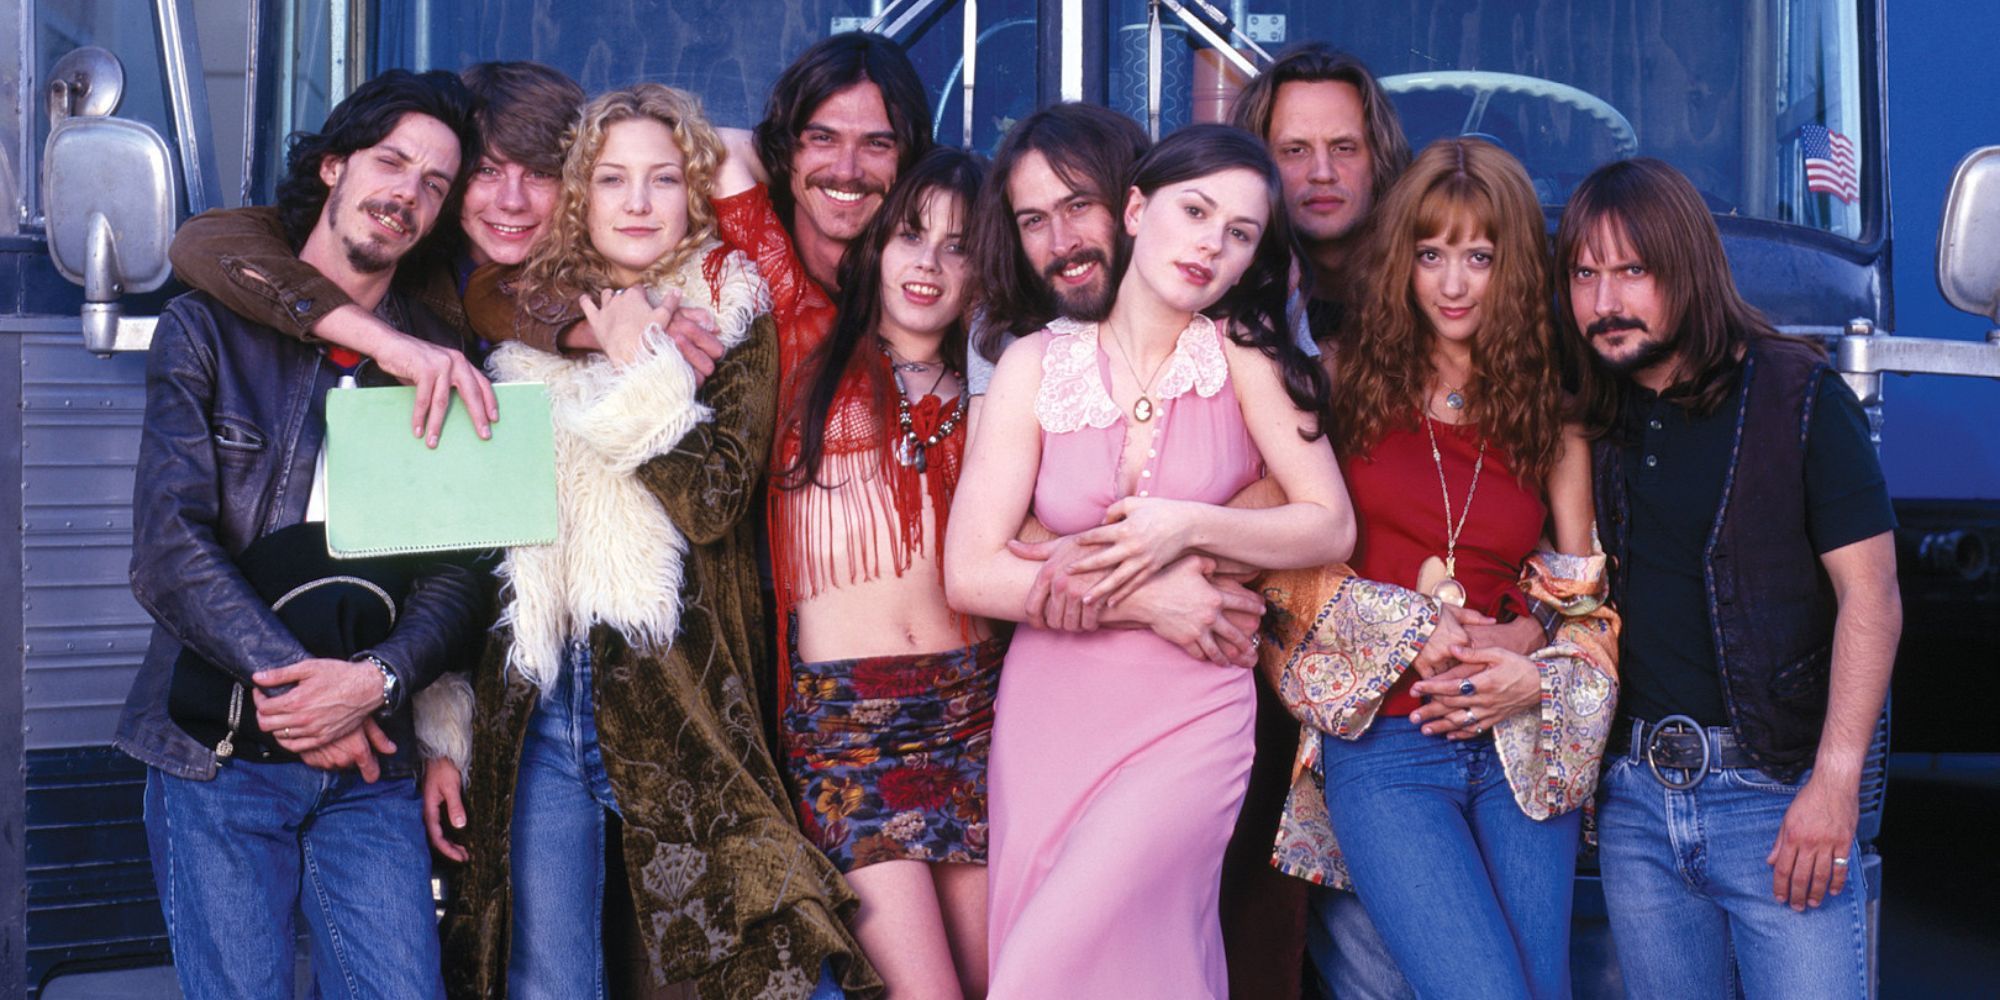 The cast of Almost Famous posing in front of a bus.